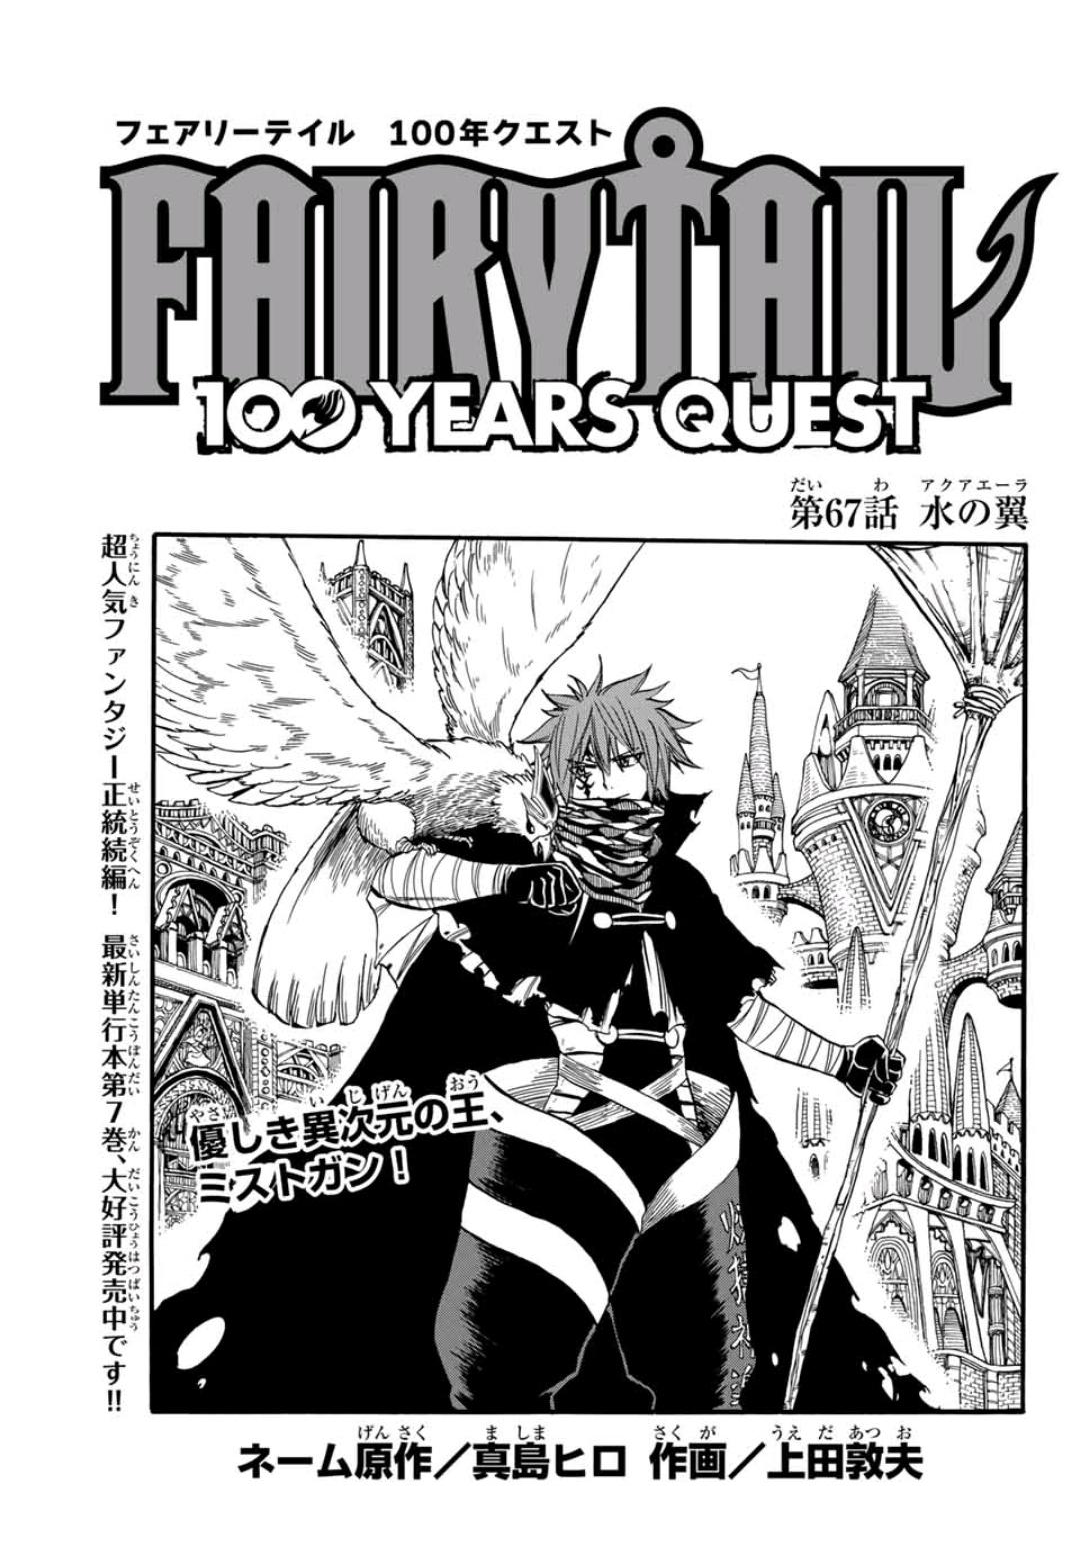 Fairy Tail: 100 Years Quest Anime - Everything You Should Know - Cultured  Vultures